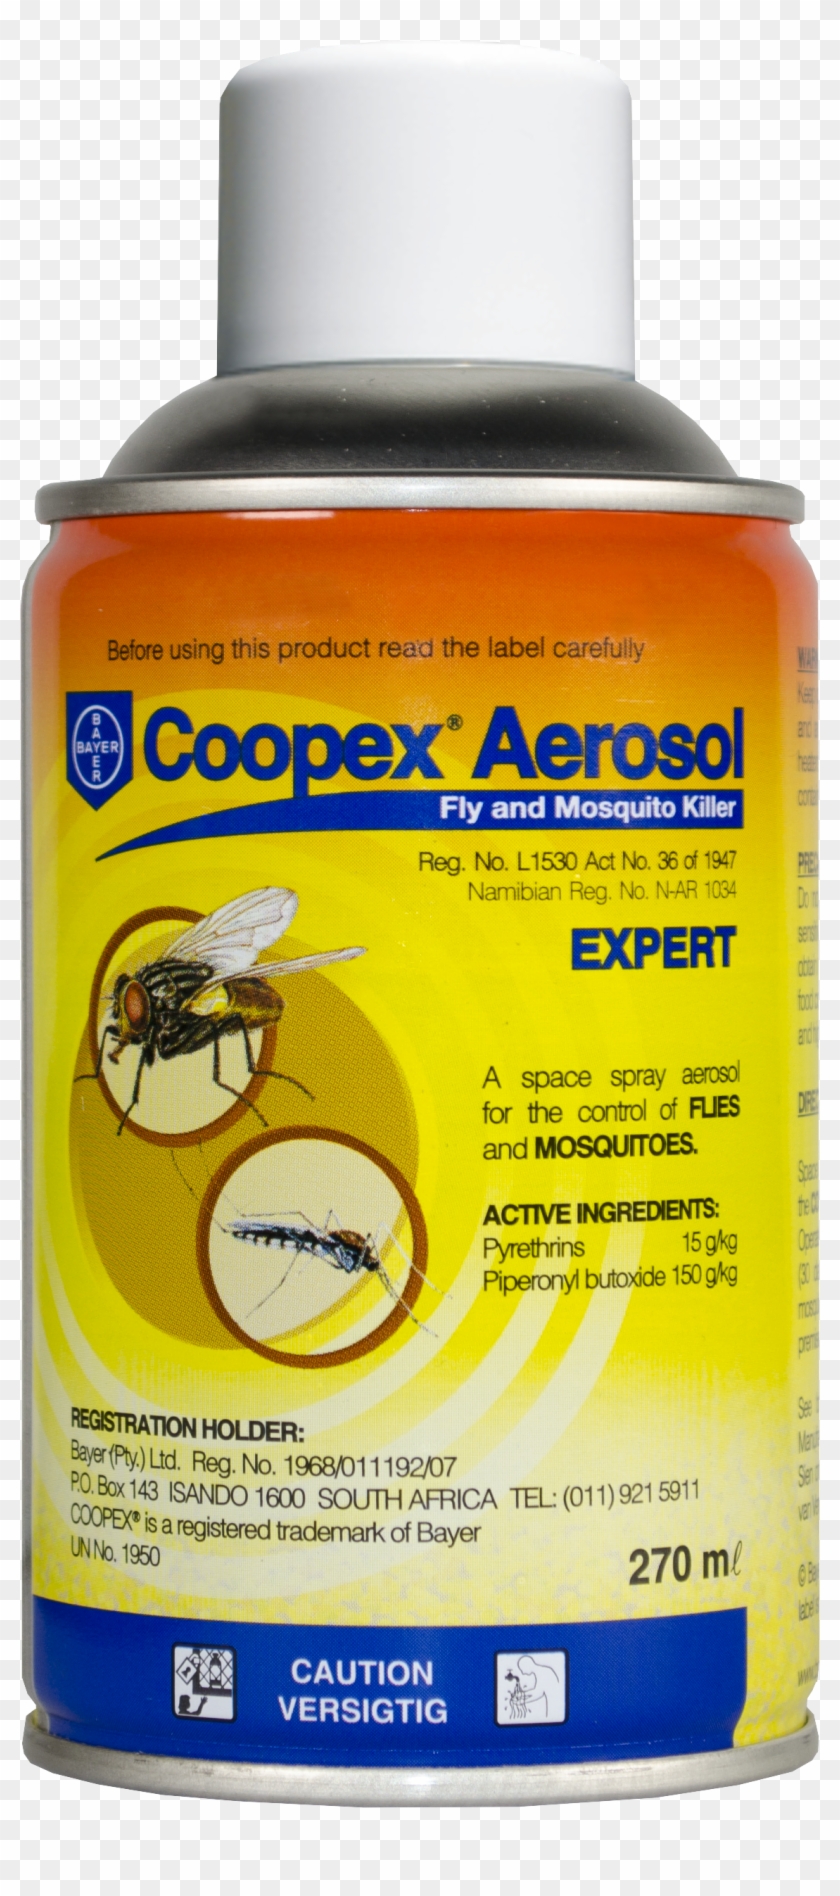 Coopex Aerosol Fly And Mosquito Killer 270ml - Hornet Clipart #5395619